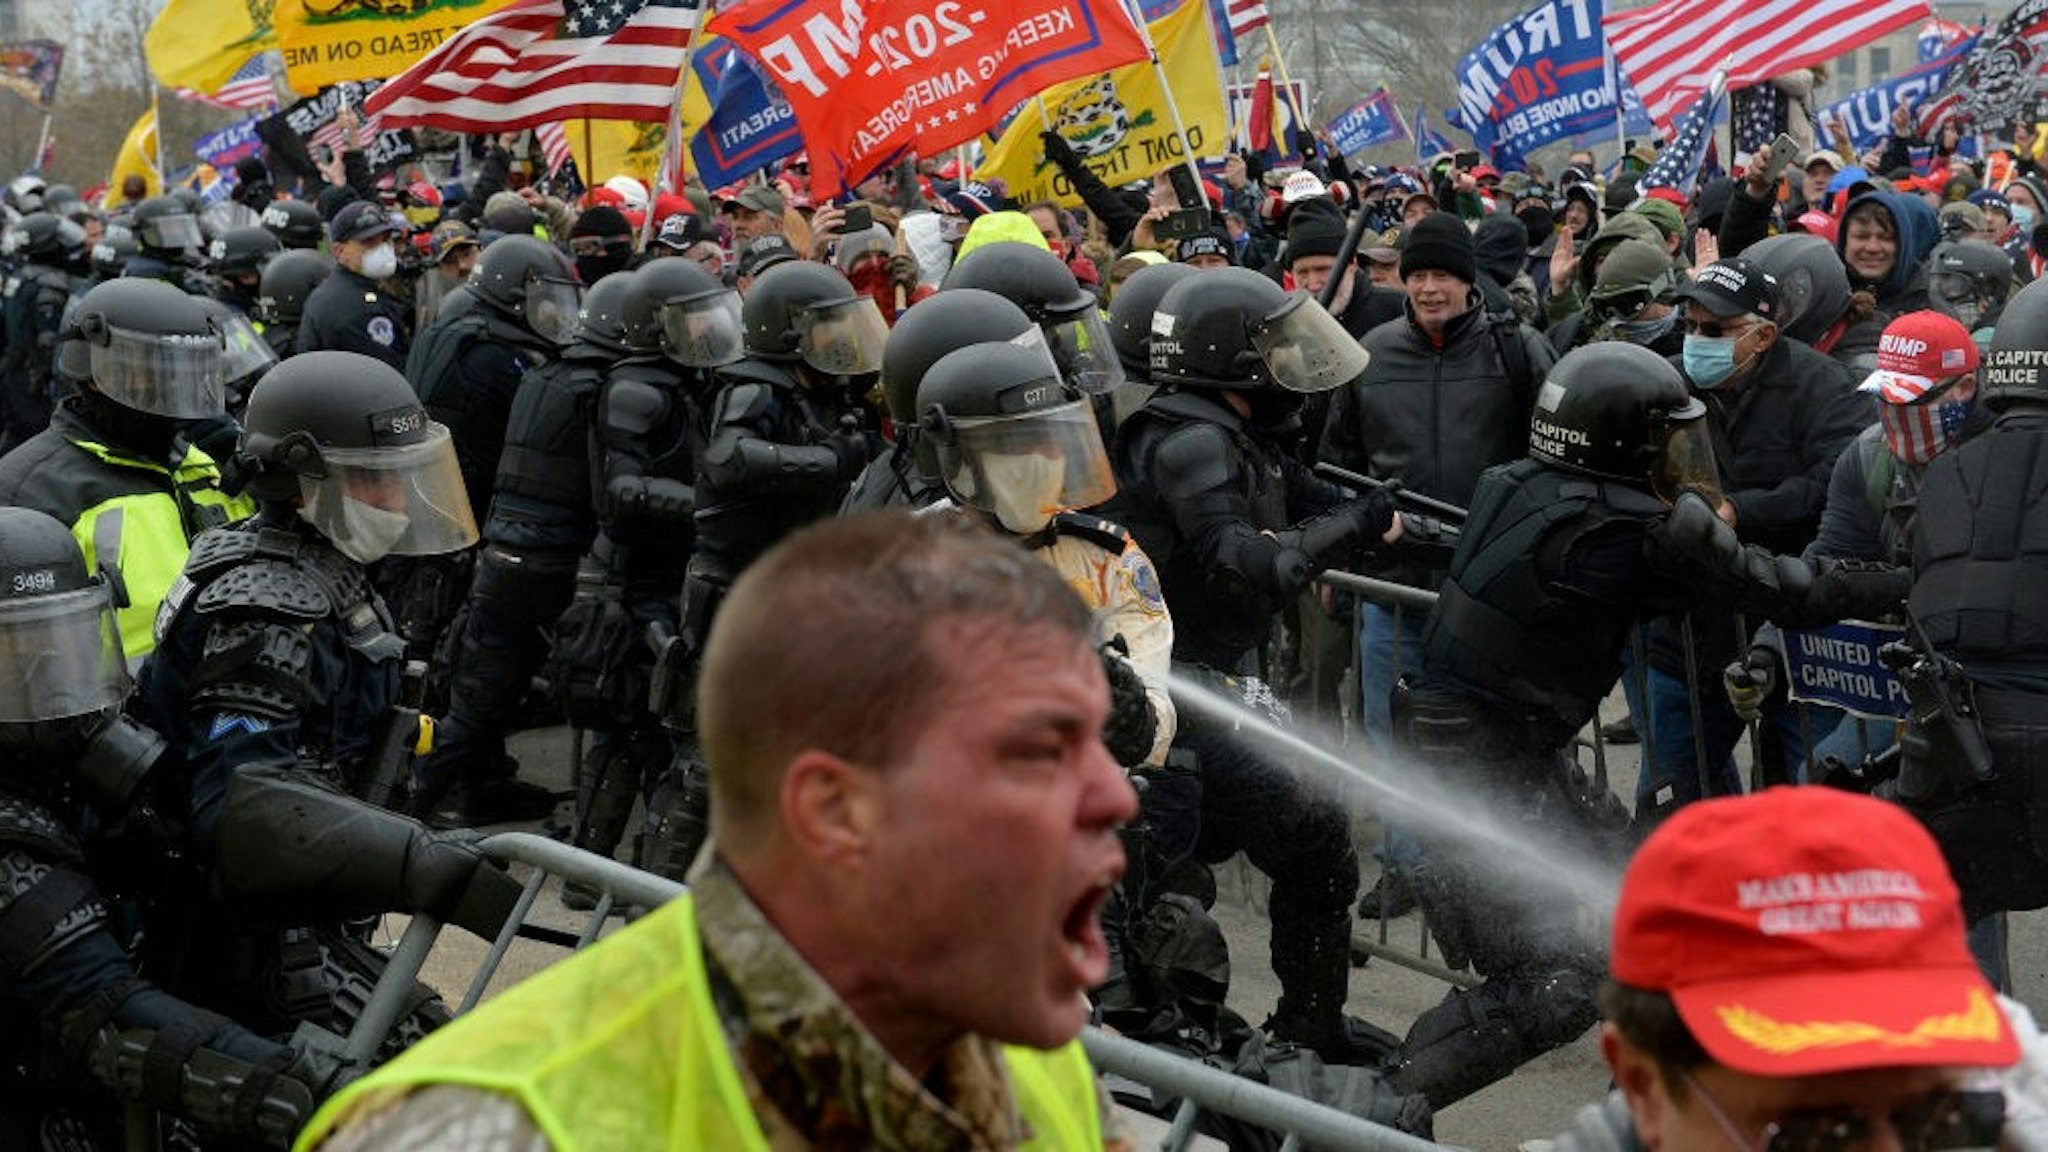 TOPSHOT - Trump supporters clash with police and security forces as people try to storm the US Capitol in Washington D.C on January 6, 2021. - Demonstrators breeched security and entered the Capitol as Congress debated the a 2020 presidential election Electoral Vote Certification. (Photo by Joseph Prezioso / AFP) (Photo by